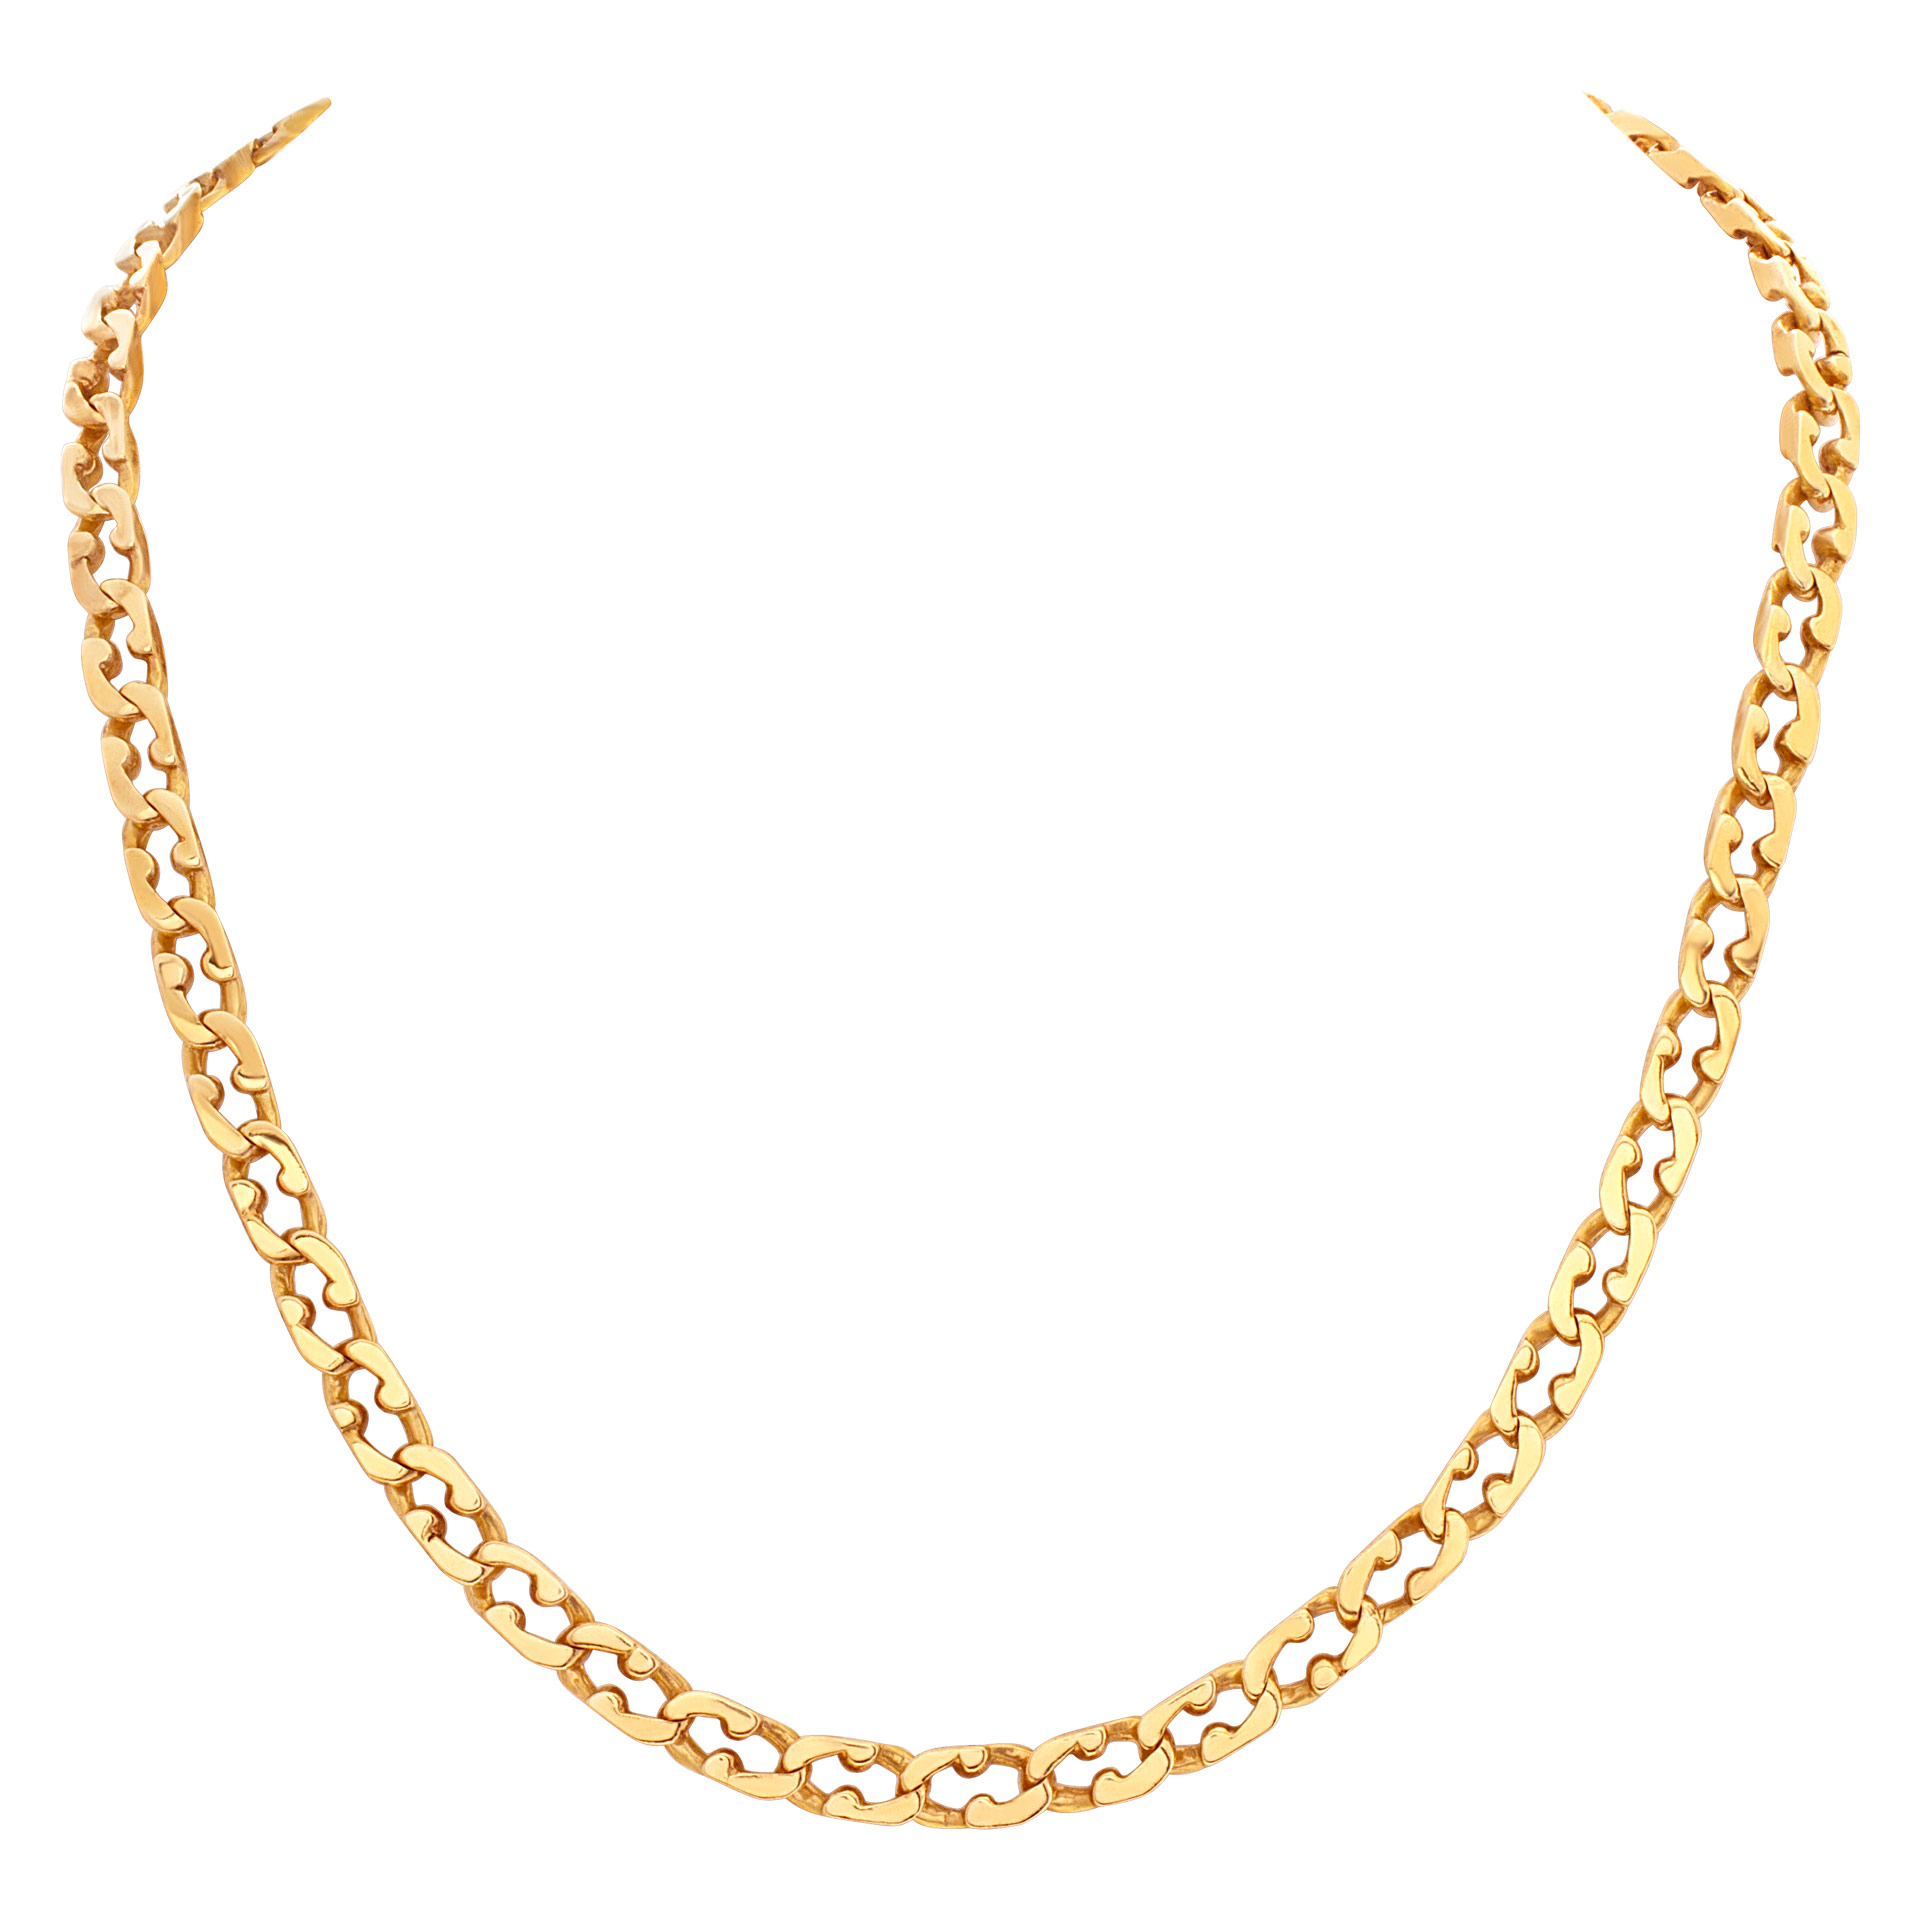 Handsome link necklace in 14k yellow gold, 17.5'' length image 1